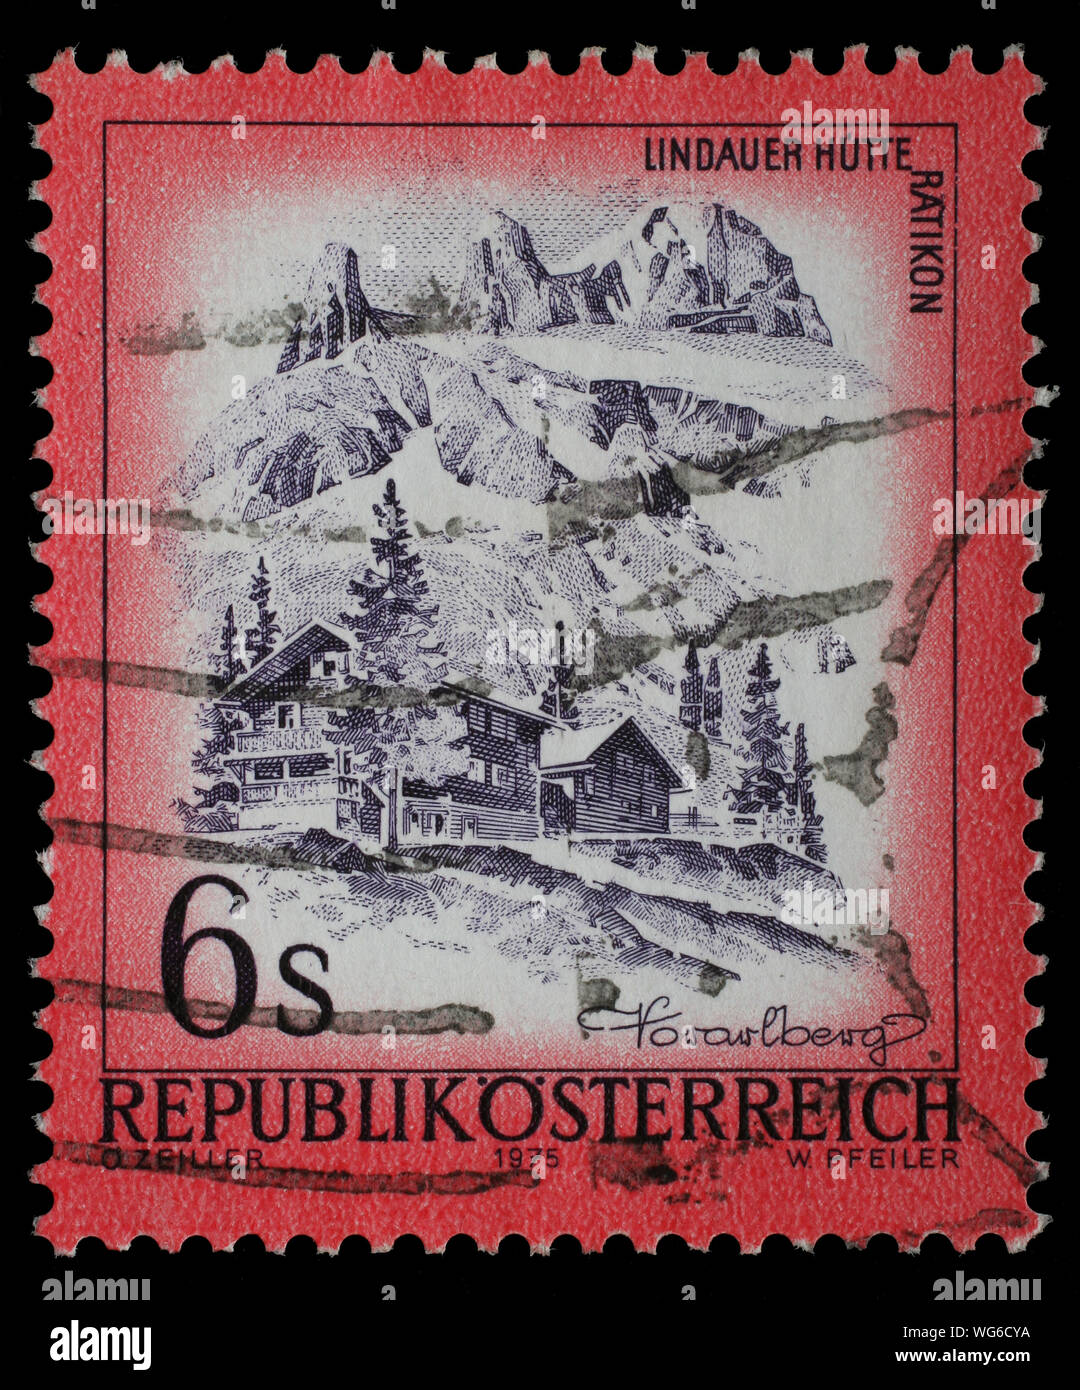 Stamp printed in Austria shows Lindauer Hutte Ratikon, from the series 'Sights in Austria', circa 1975. Stock Photo